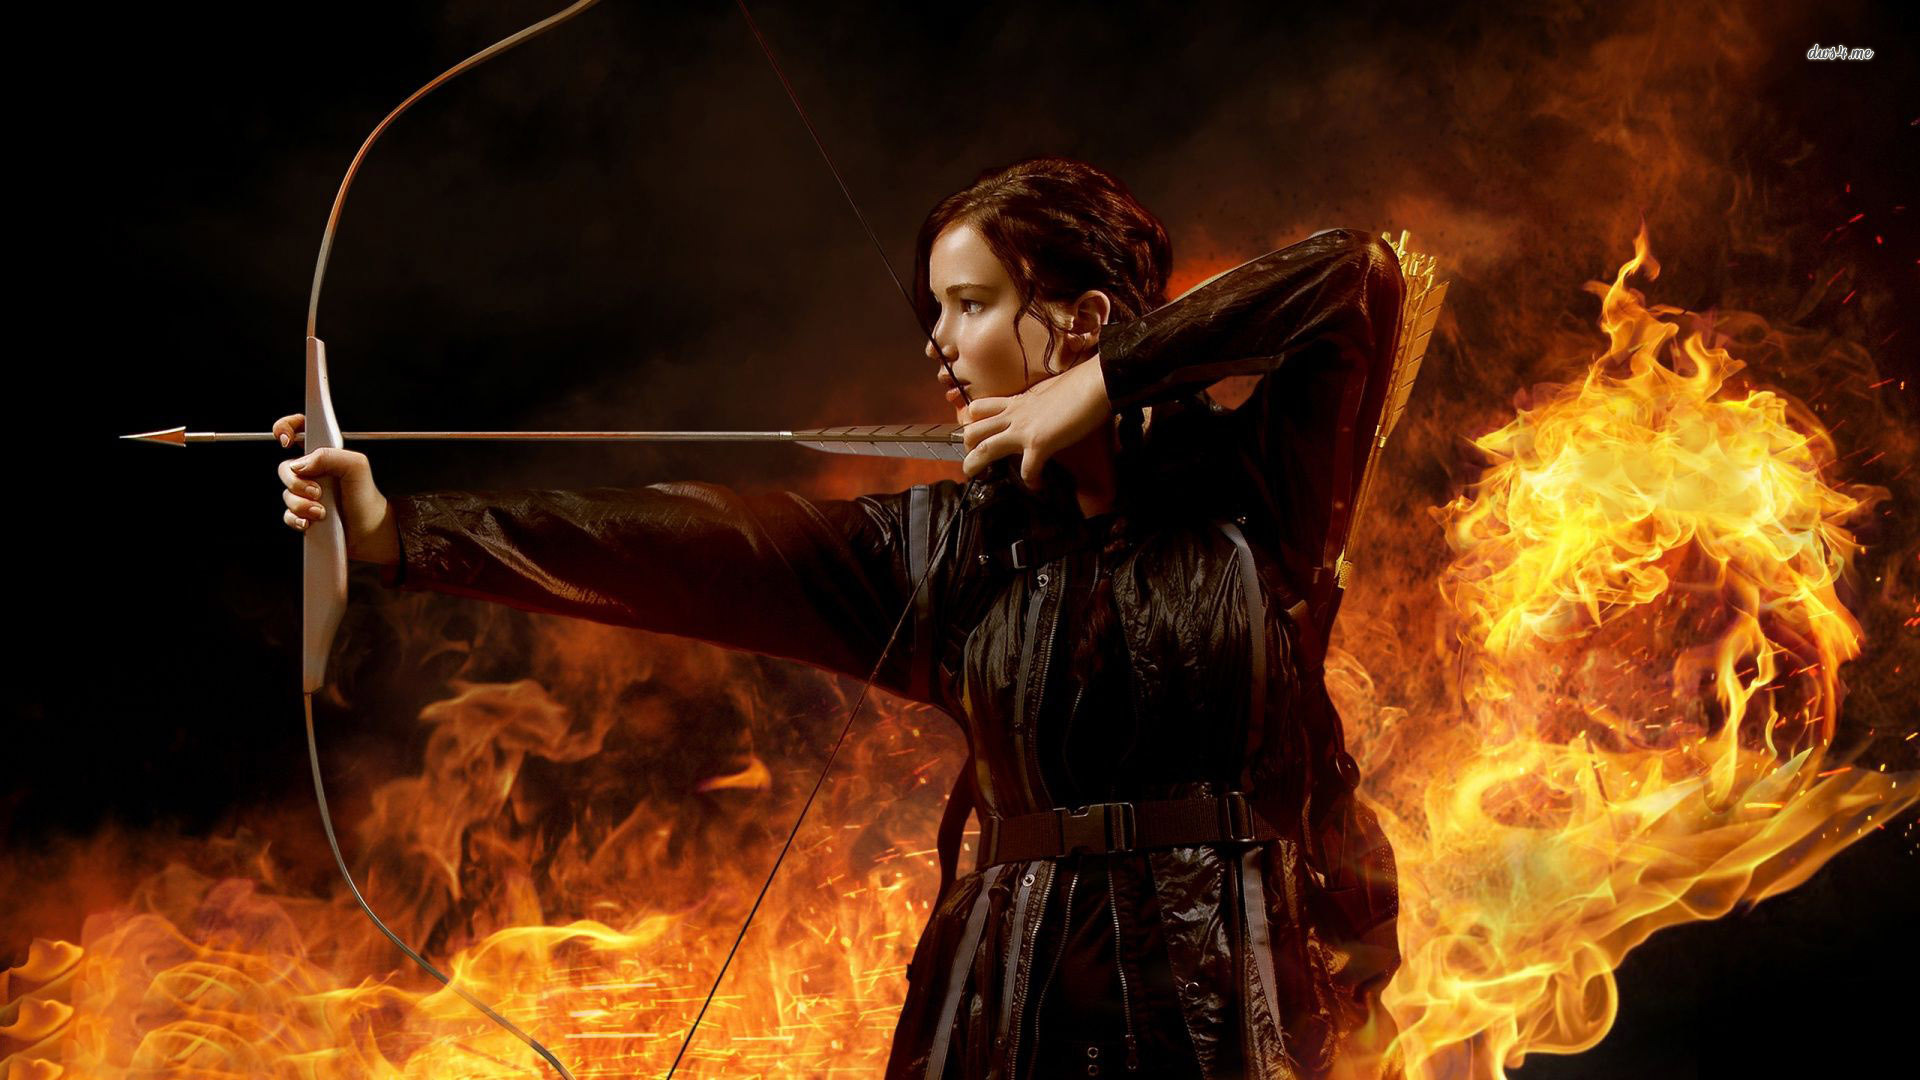 44519 jennifer lawrence as katniss in the hunger games 1920x1080